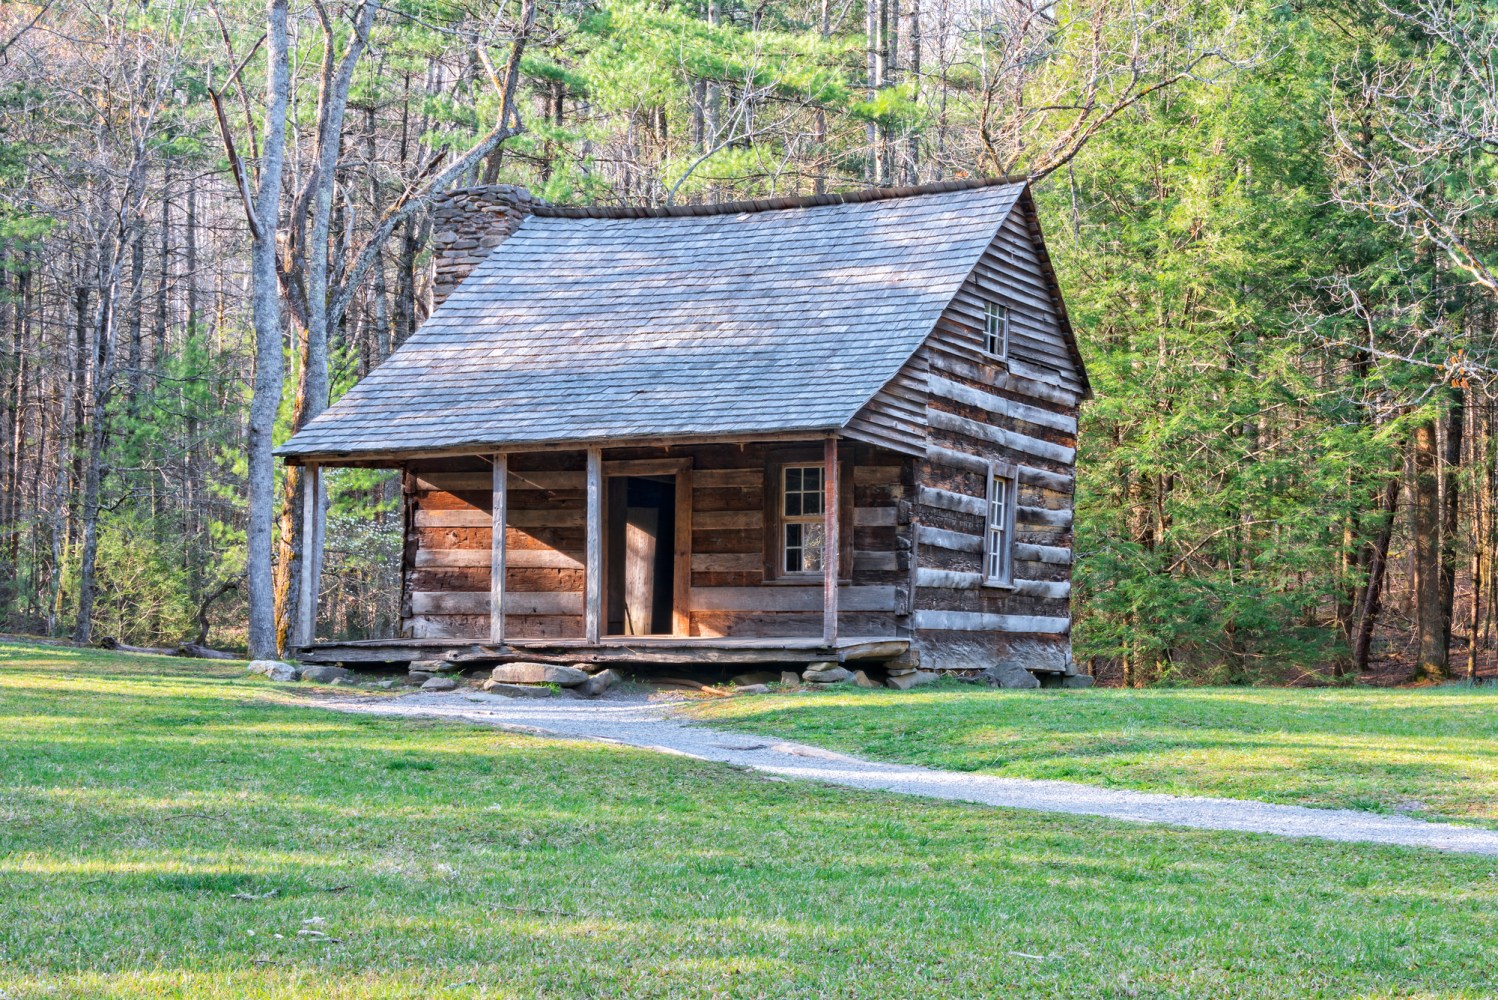 Carter Shields Cabin in Cades Cove, Great Smoky Mountains National Park, Tennessee.